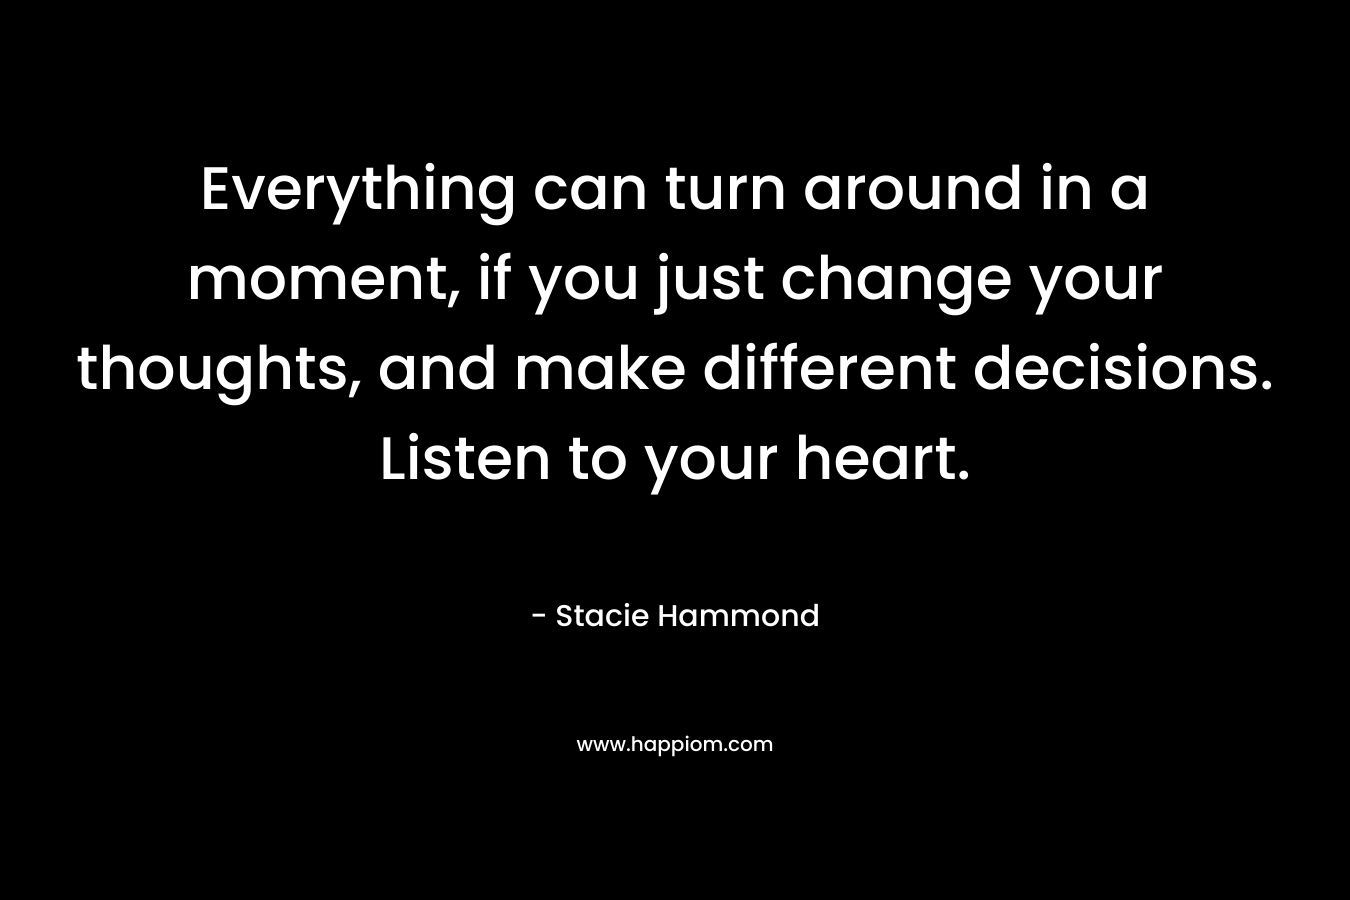 Everything can turn around in a moment, if you just change your thoughts, and make different decisions. Listen to your heart. – Stacie Hammond